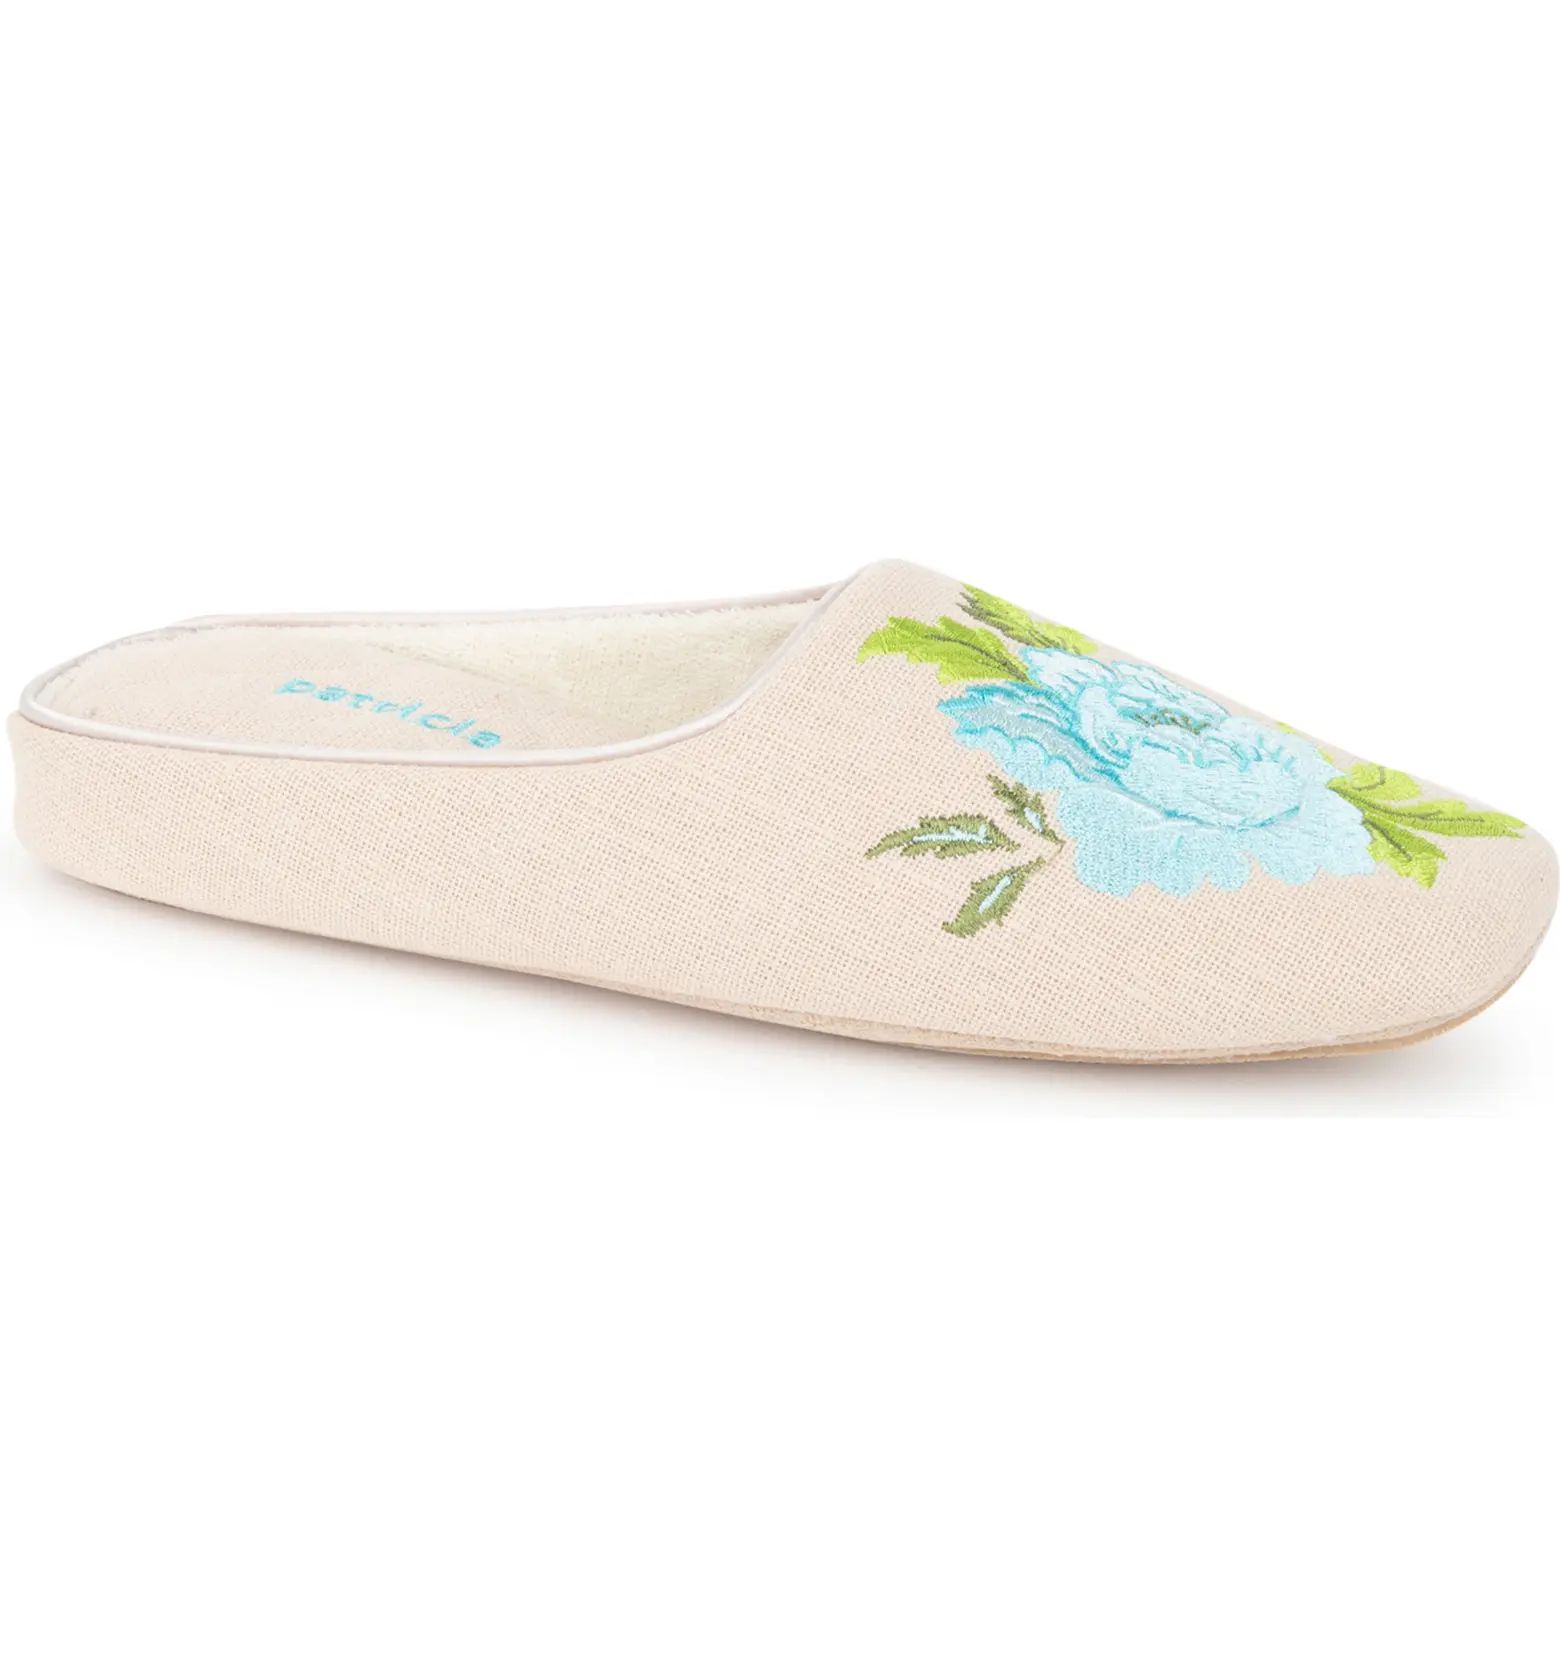 Embroidered Peony Slipper (Women) | Nordstrom